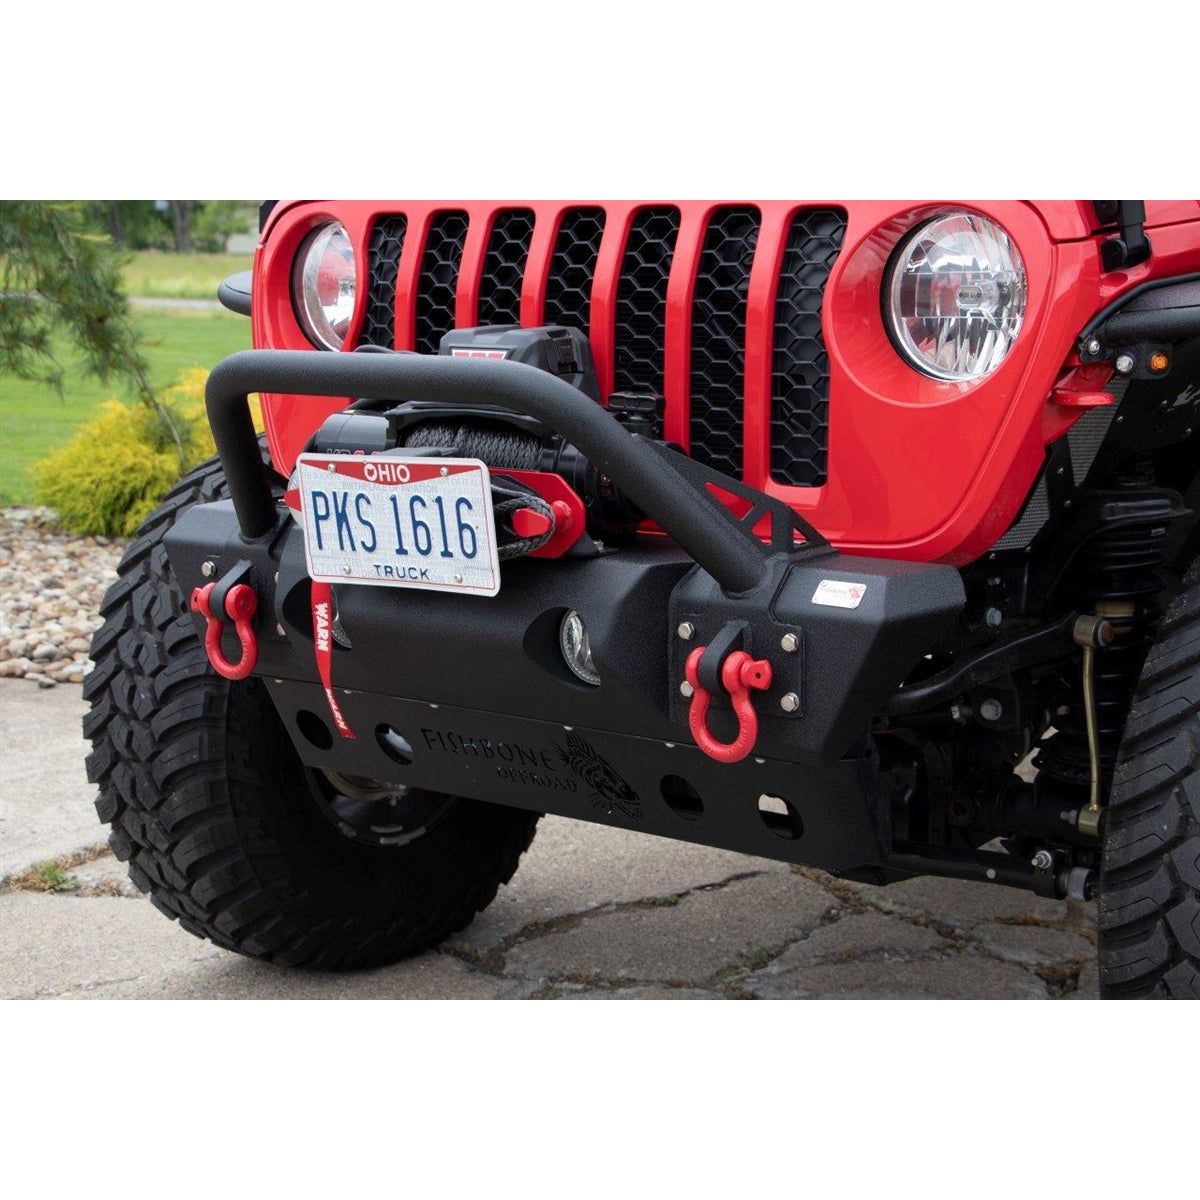 Fishbone Offroad Stubby Front Bumper for 18-21 Jeep Wrangler JL